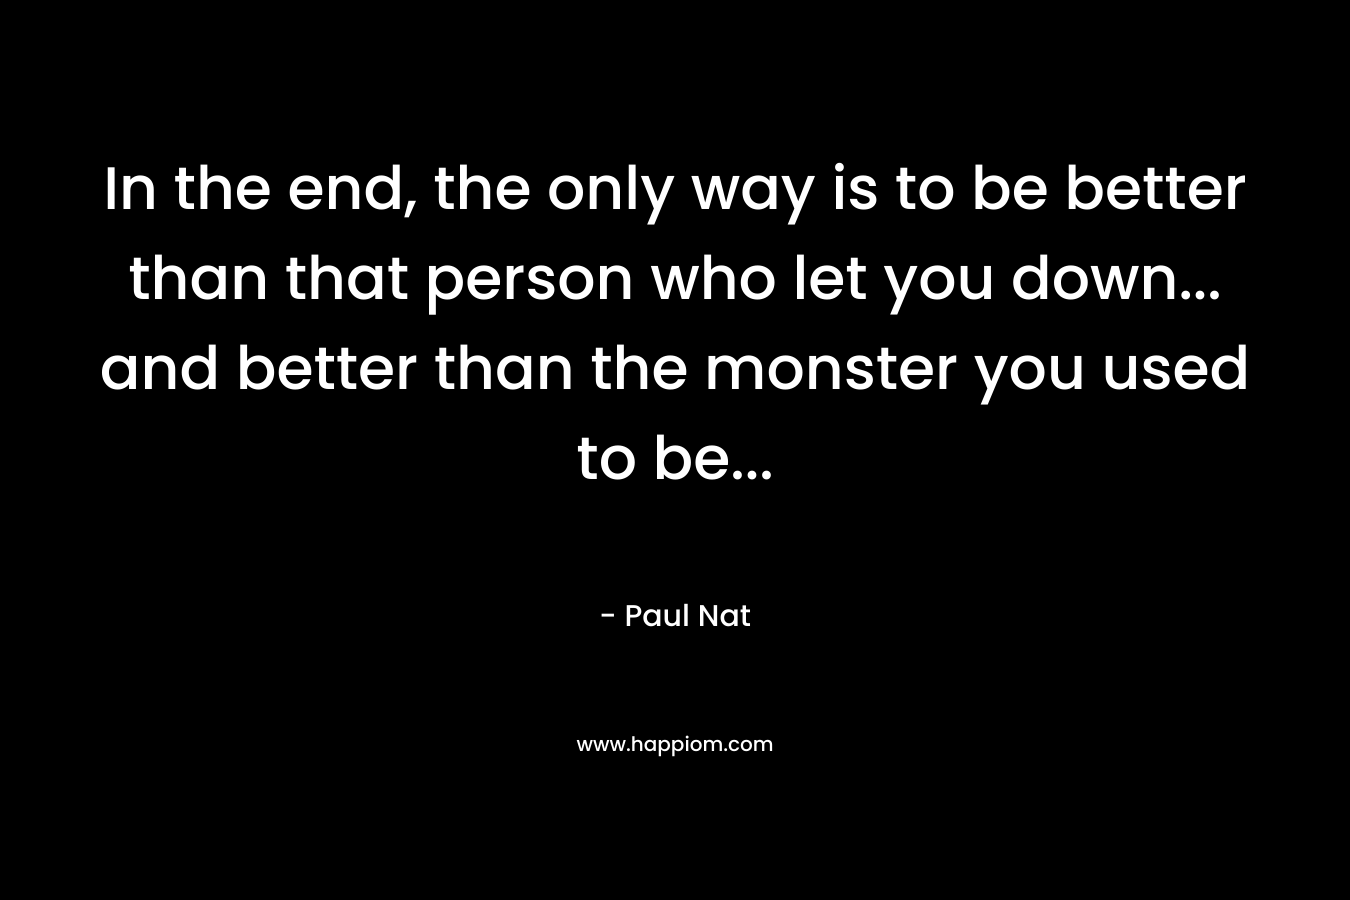 In the end, the only way is to be better than that person who let you down... and better than the monster you used to be...